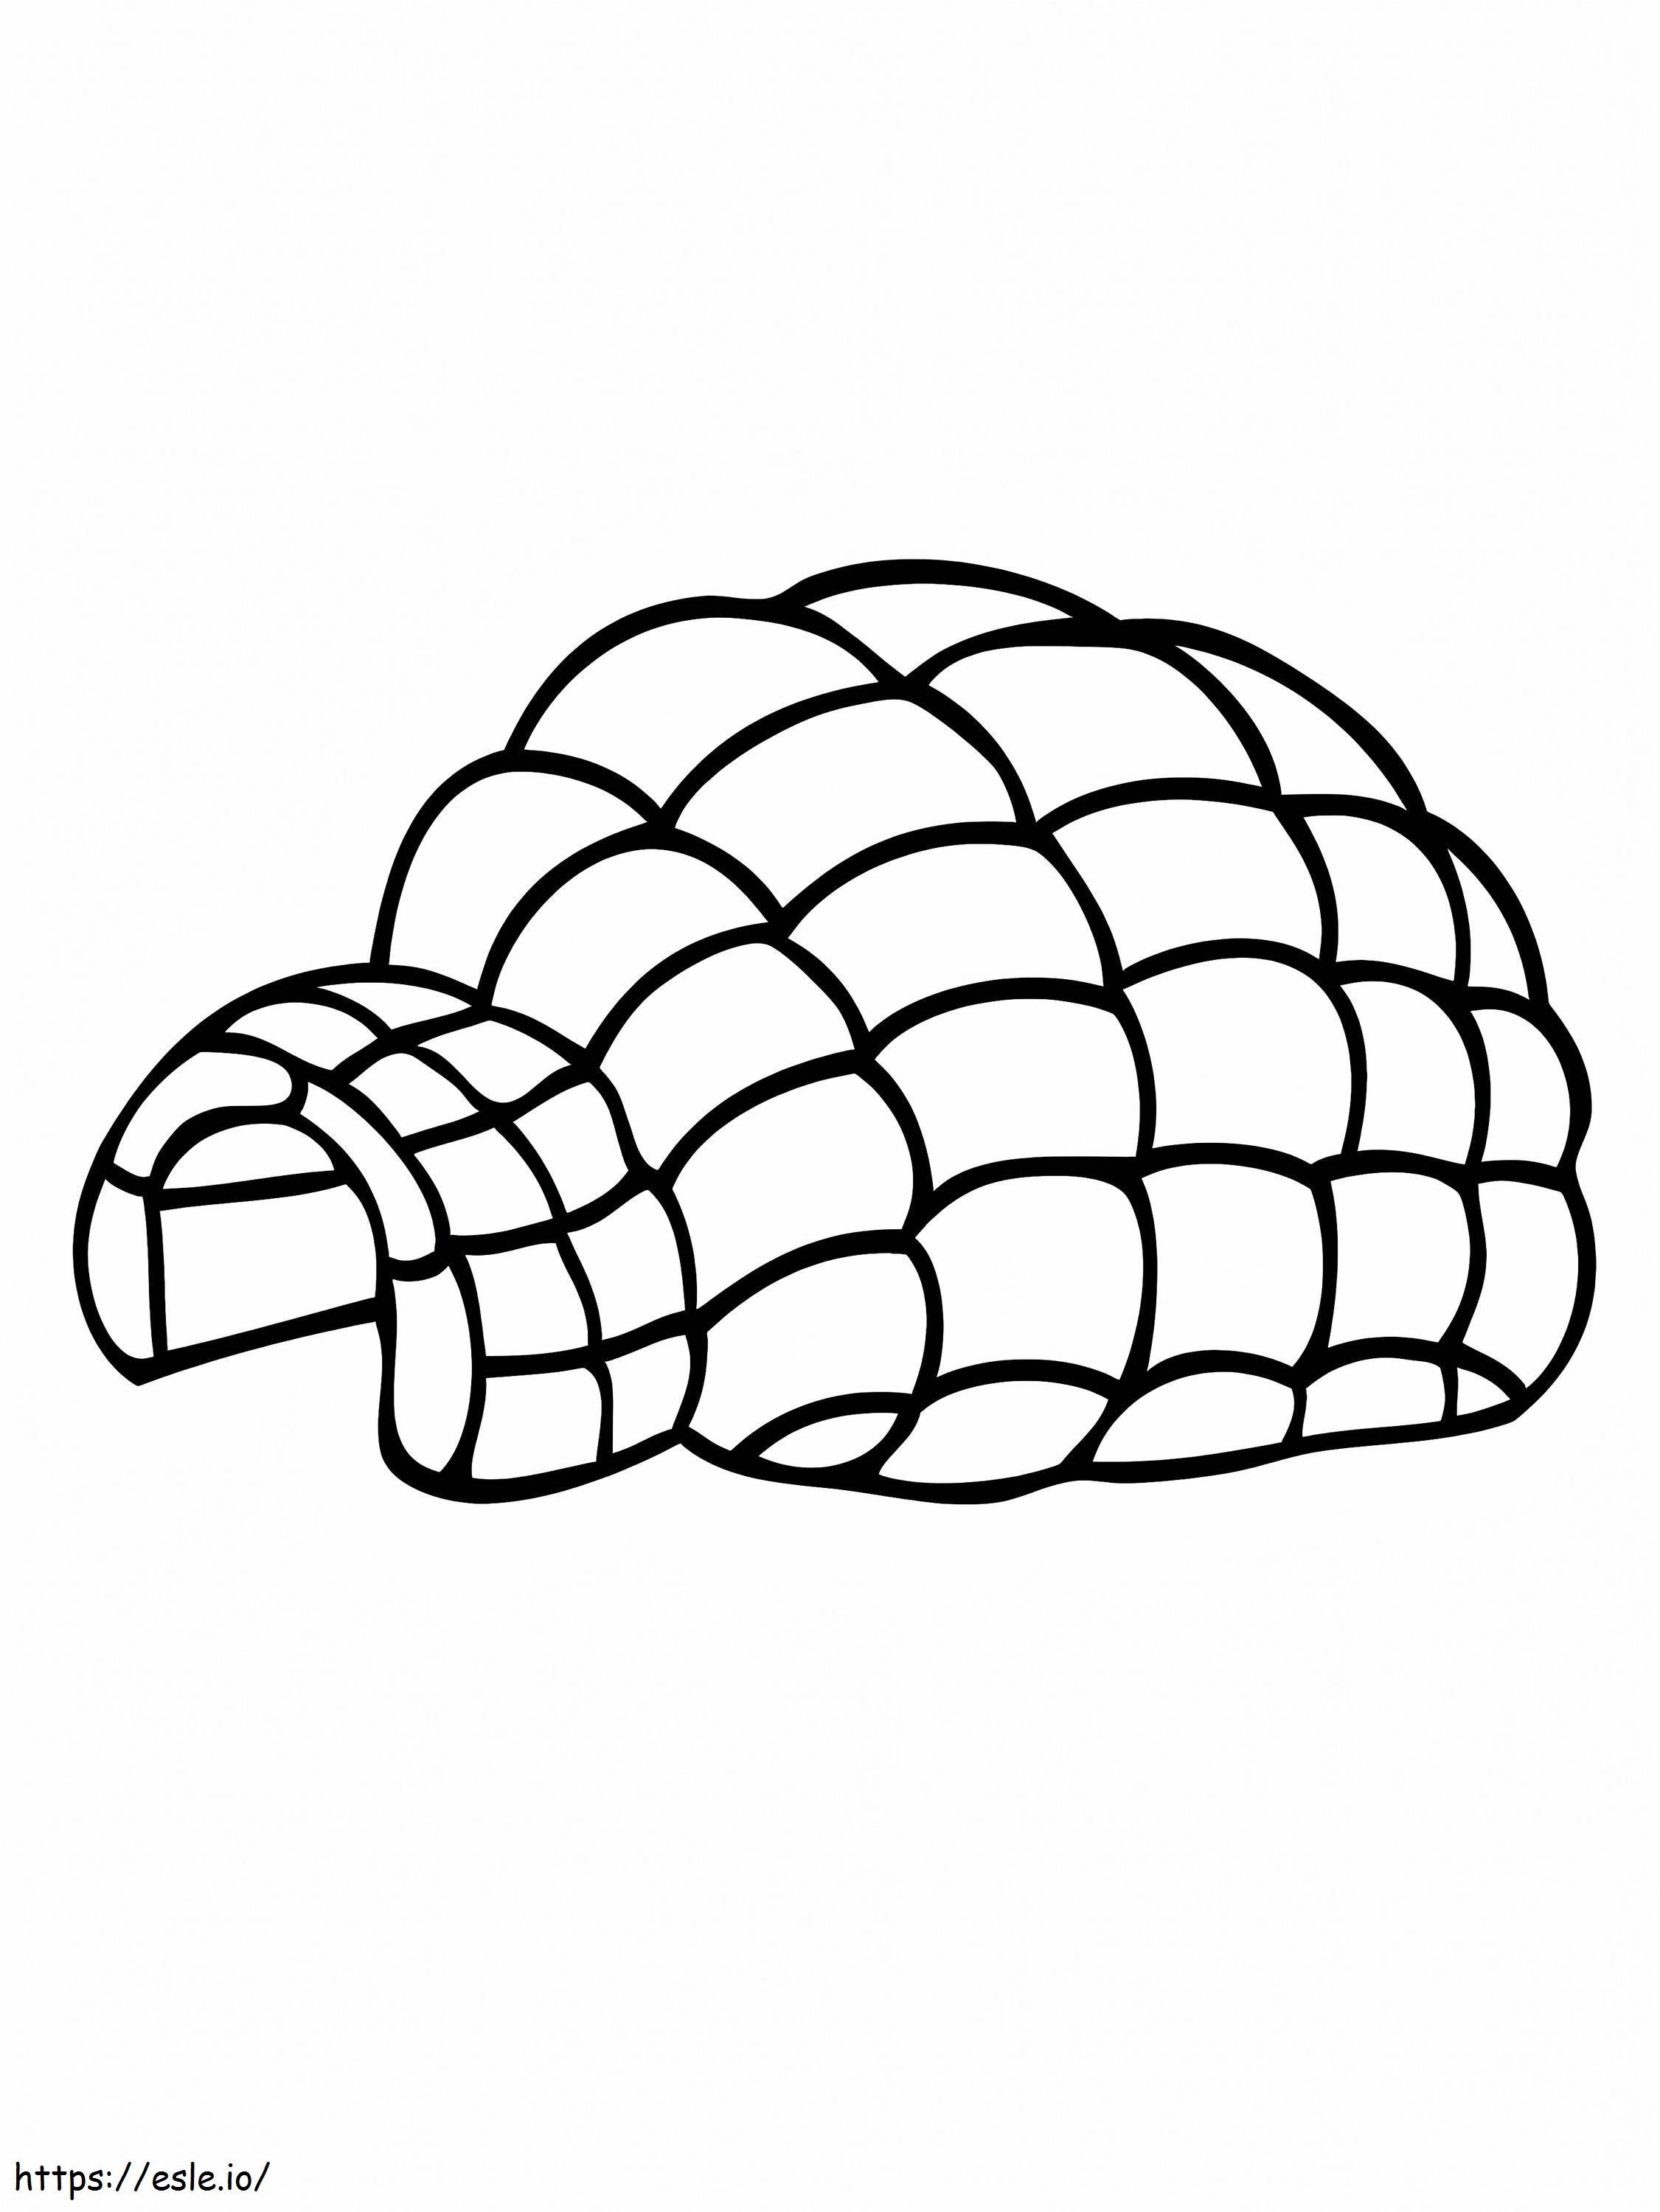 Igloo For Kids coloring page